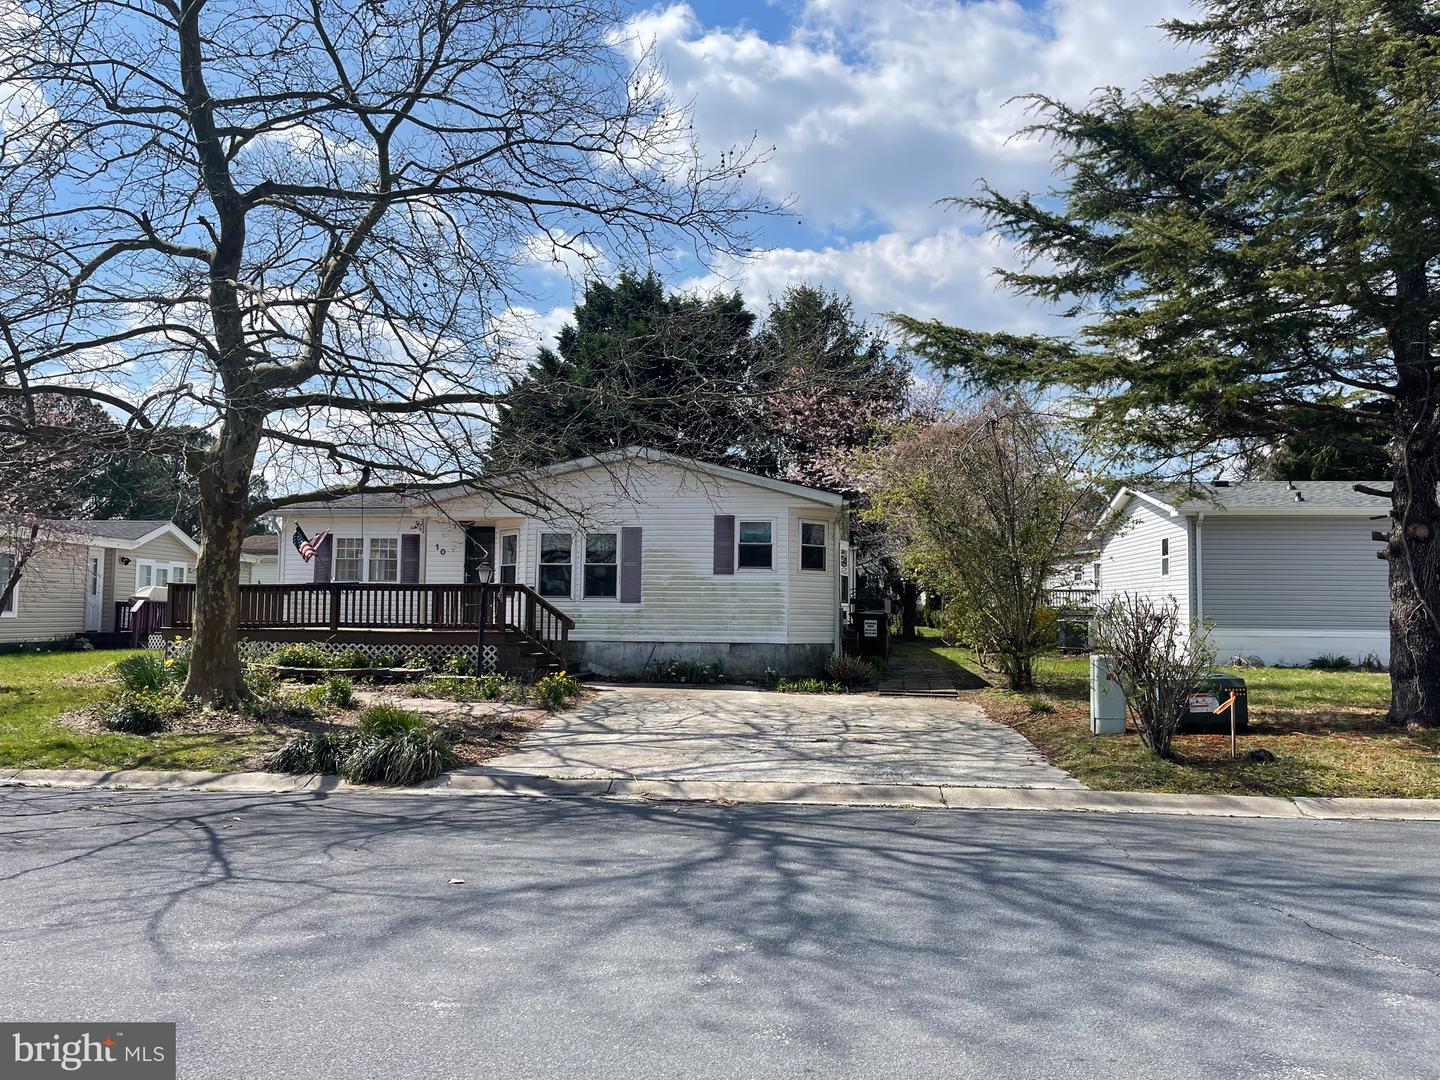 MDWO2019962-802957767676-2024-03-29-19-05-25 10 Ensign Dr | Berlin, MD Real Estate For Sale | MLS# Mdwo2019962  - 1st Choice Properties